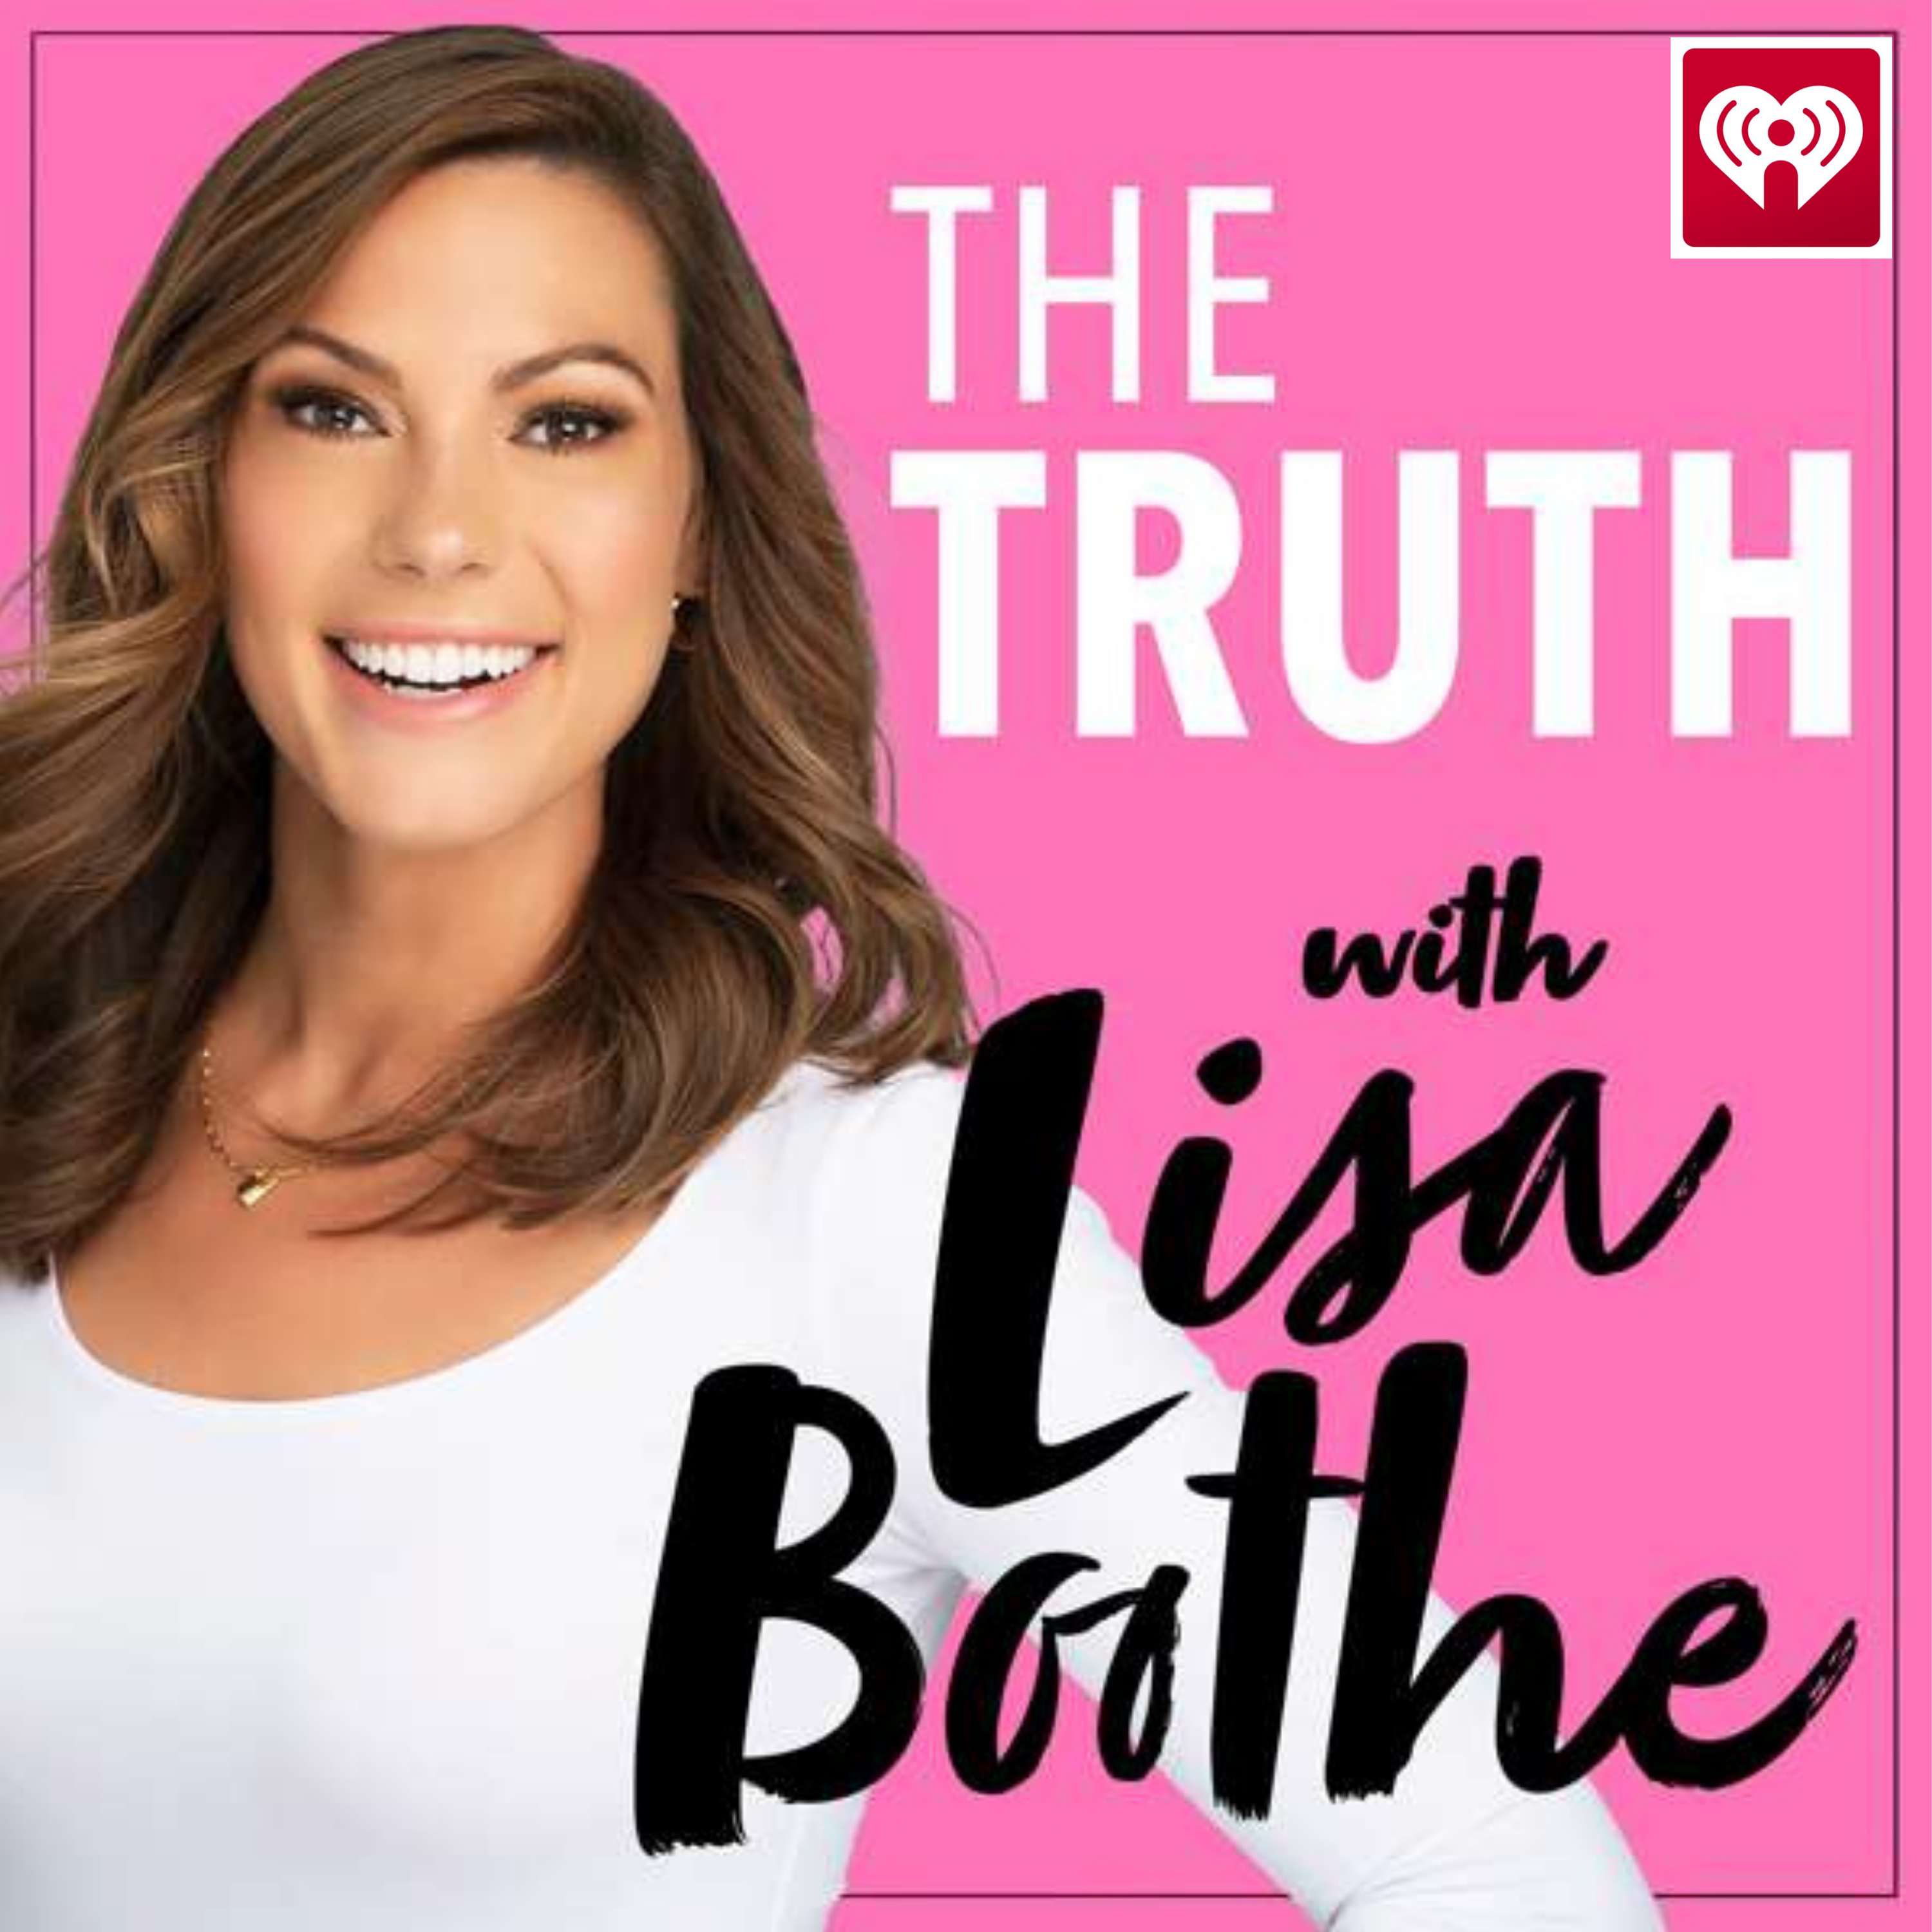 The Truth with Lisa Boothe: Sen. Tommy Tuberville vs. the US Military